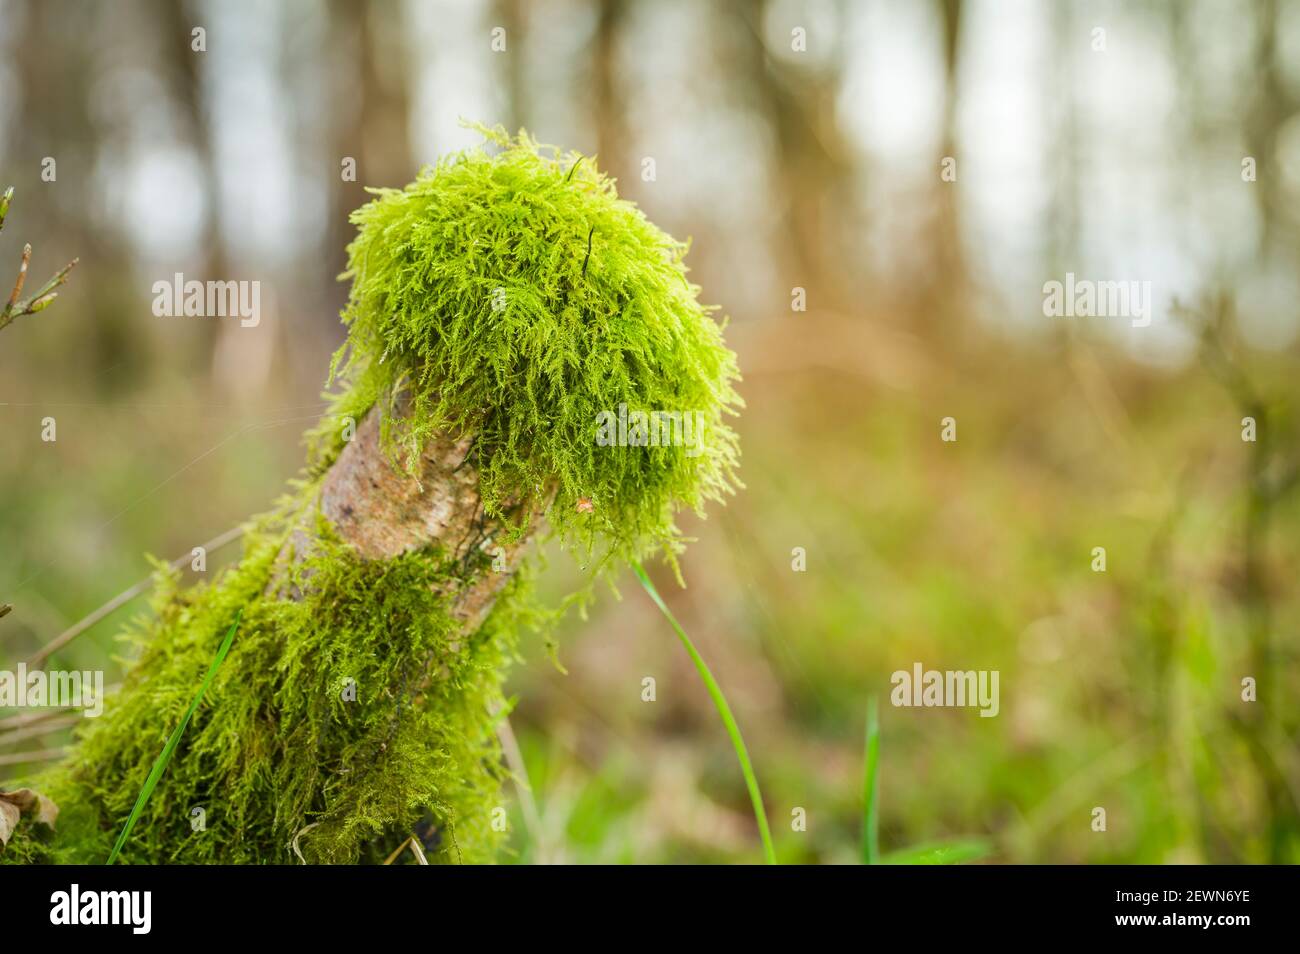 A forest in England in the spring / season Stock Photo